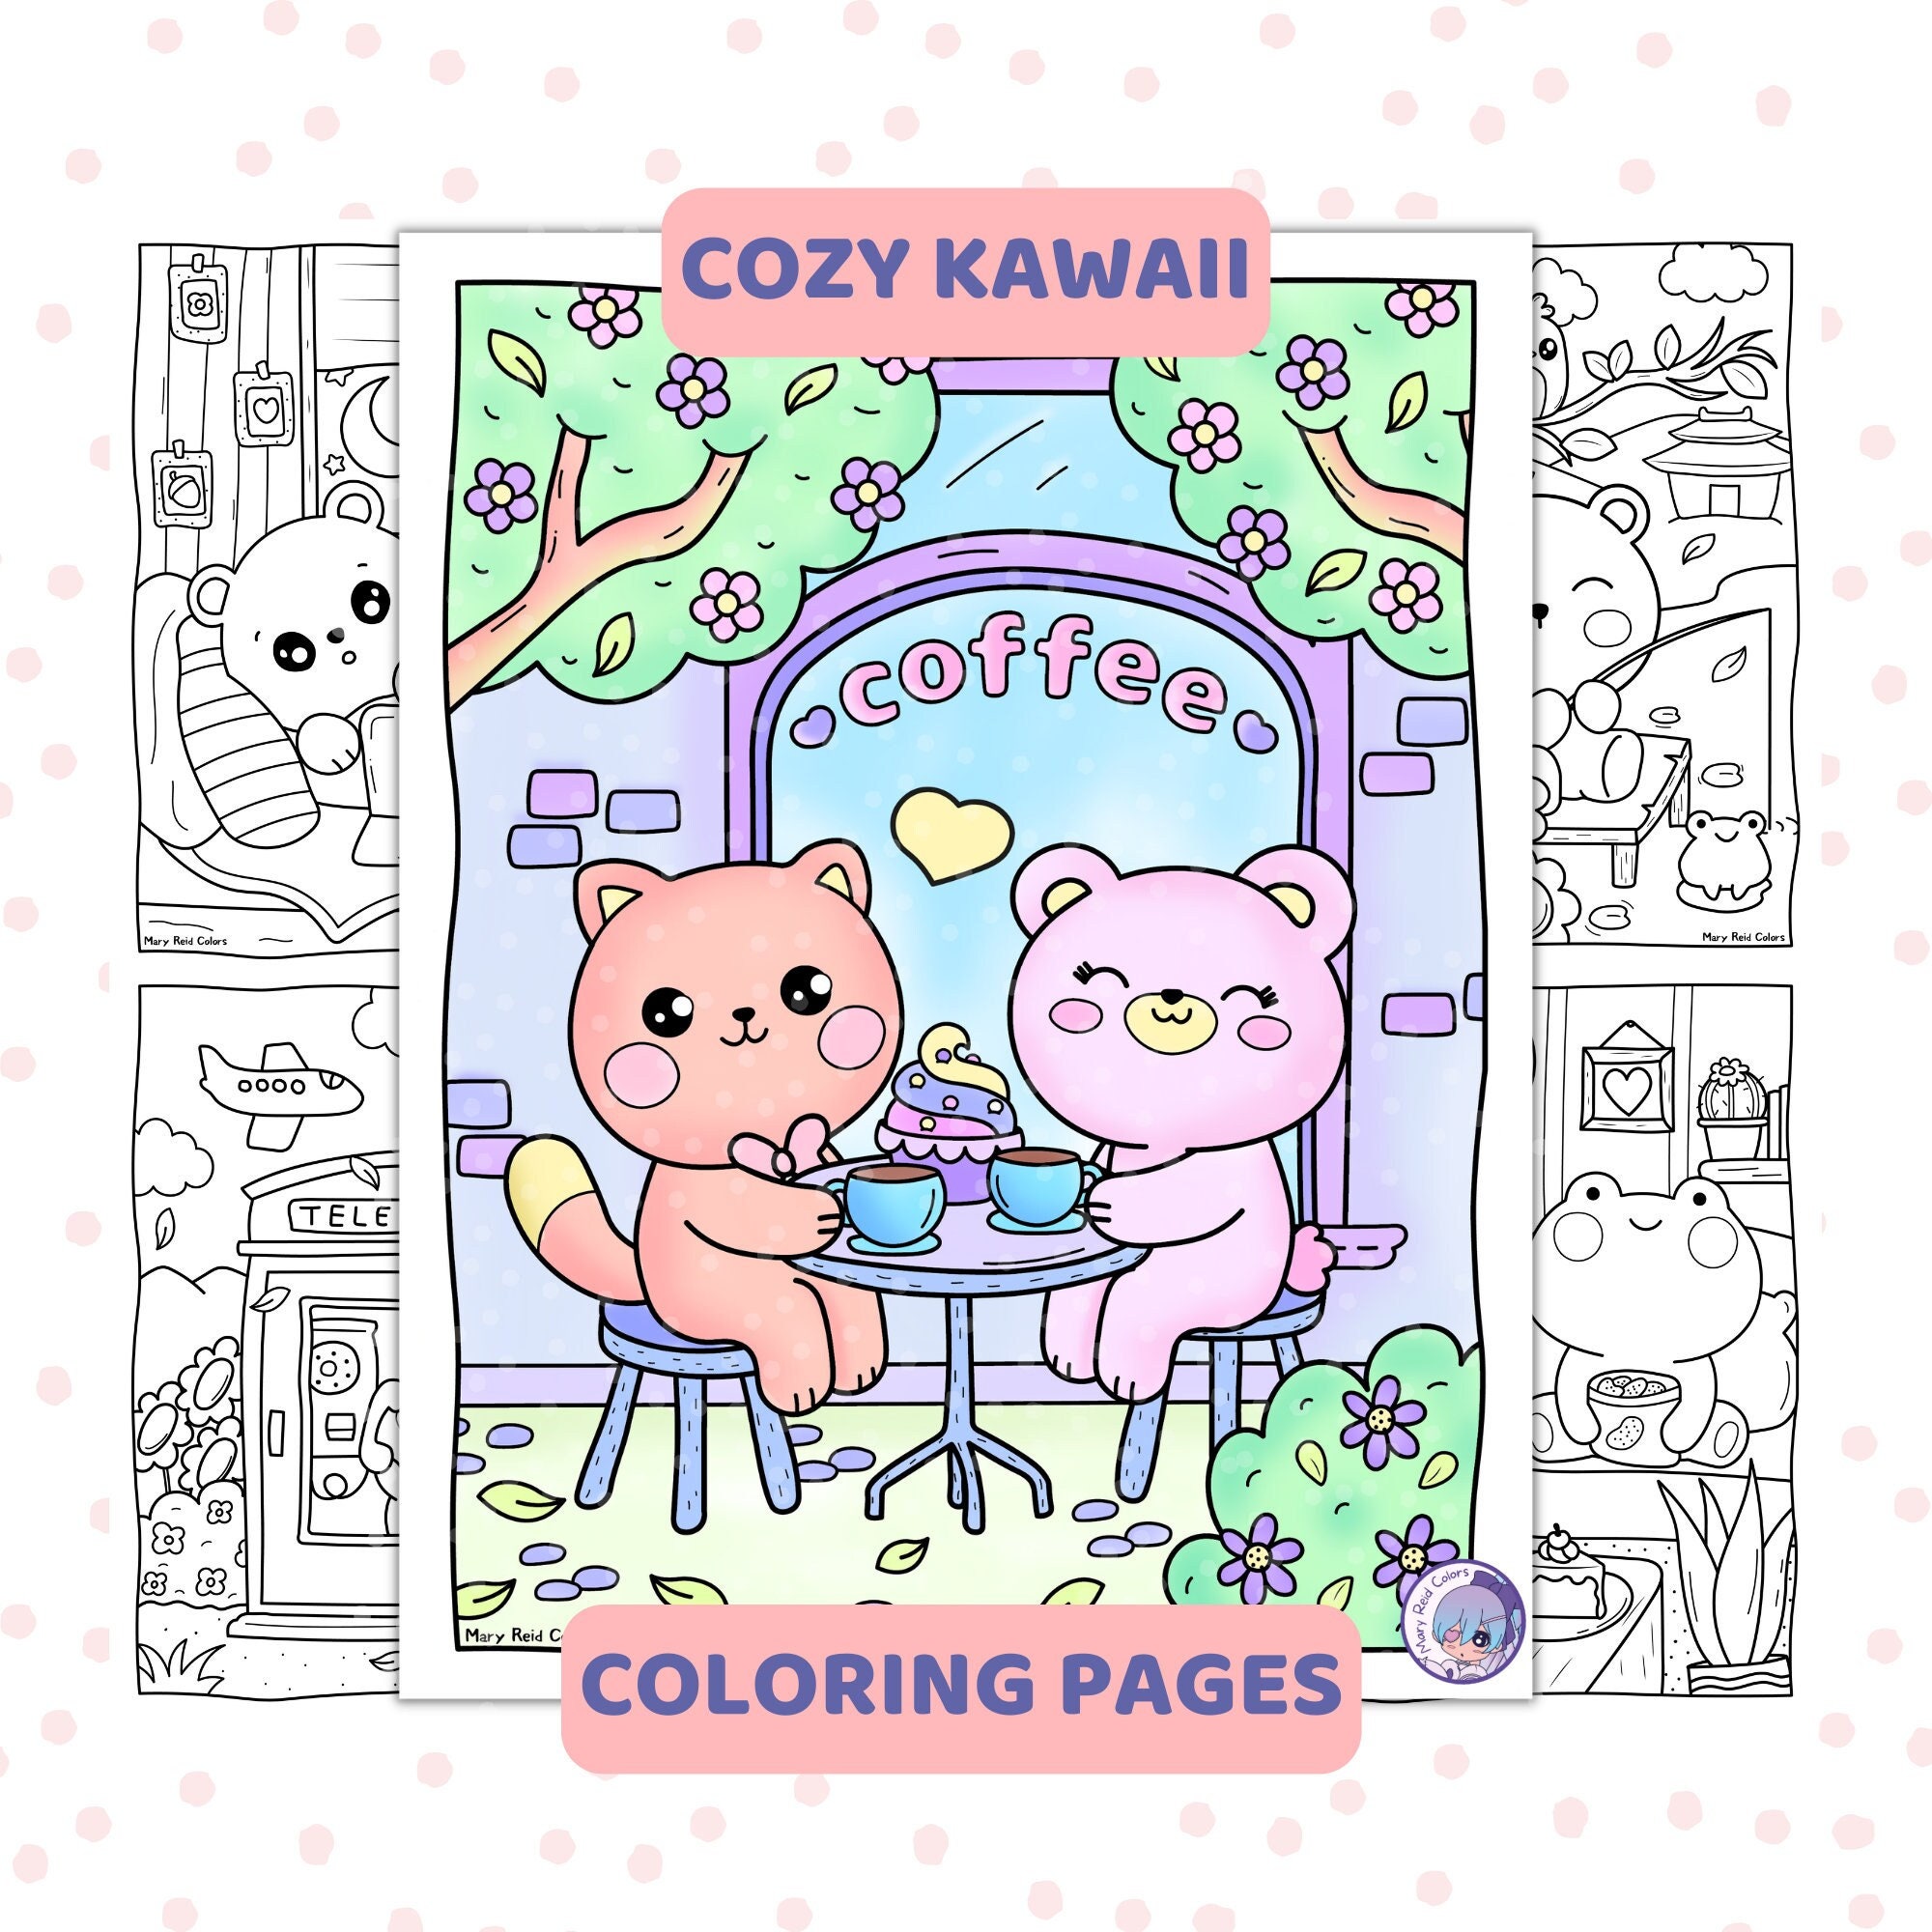 CUTE Characters Bobbie Goods Coloring Book For Girls Ages 4-6